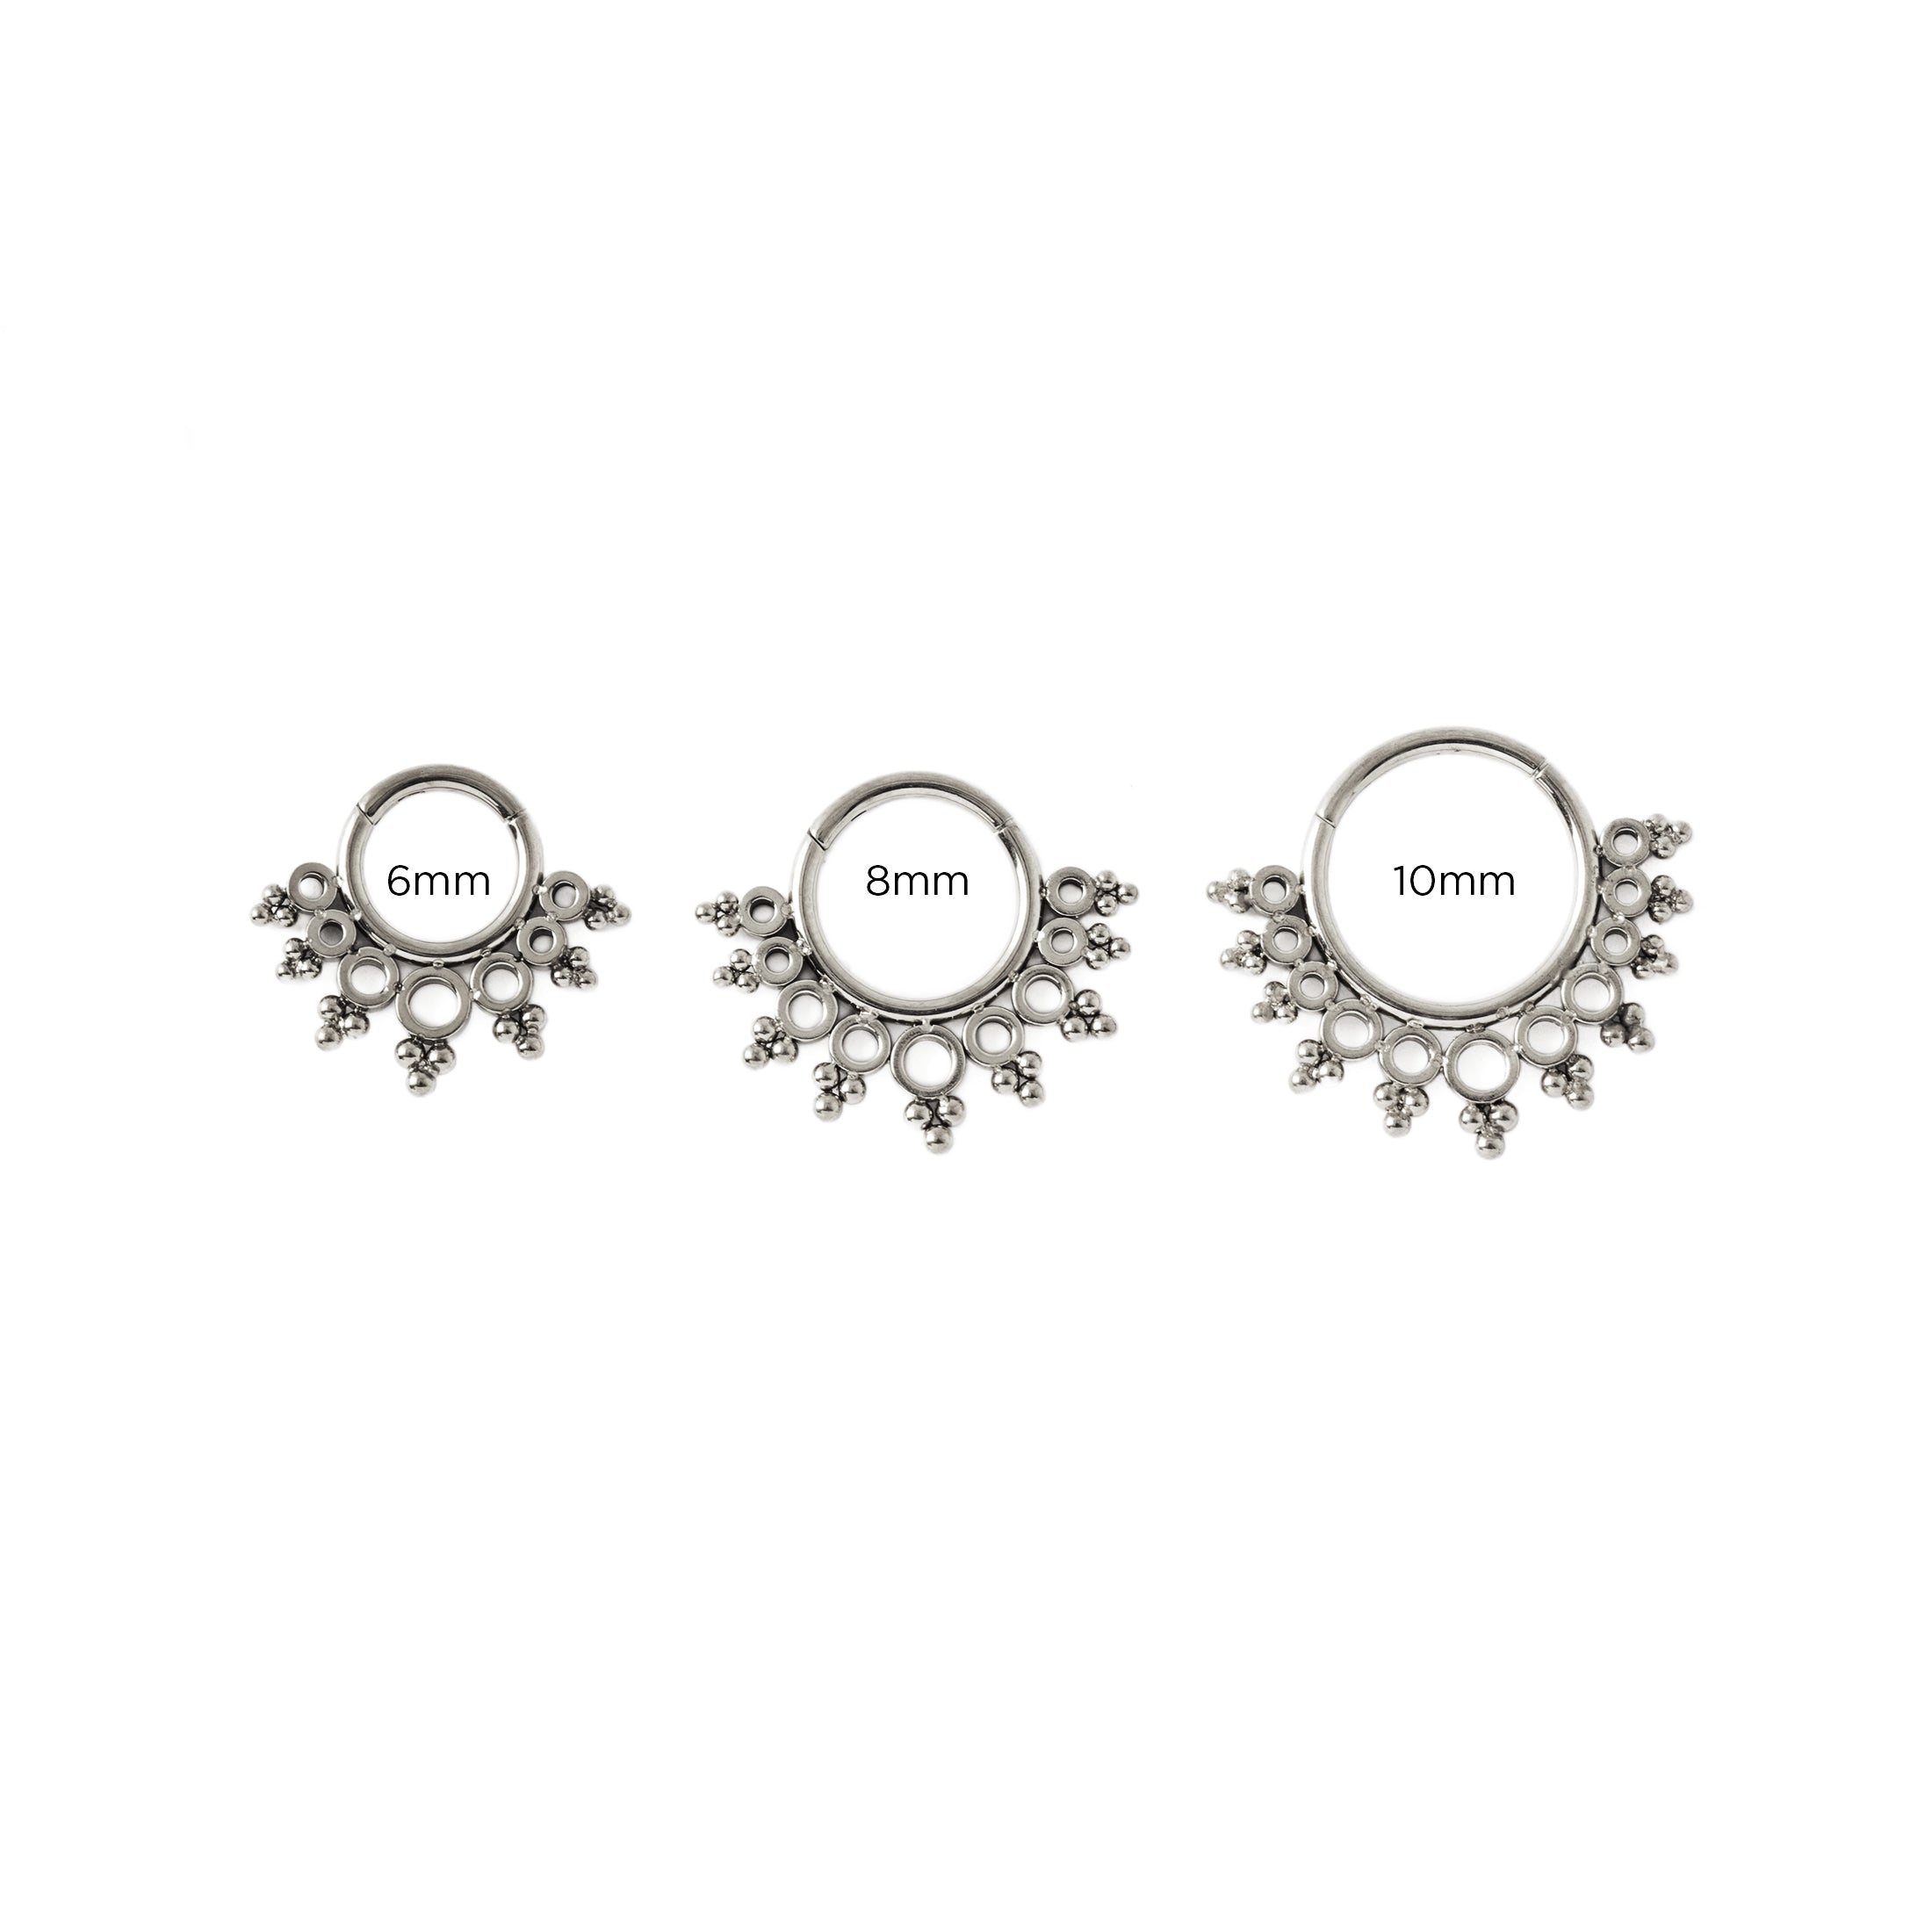 6mm, 8mm and 10mm Tarita Septum Clickers frontal view